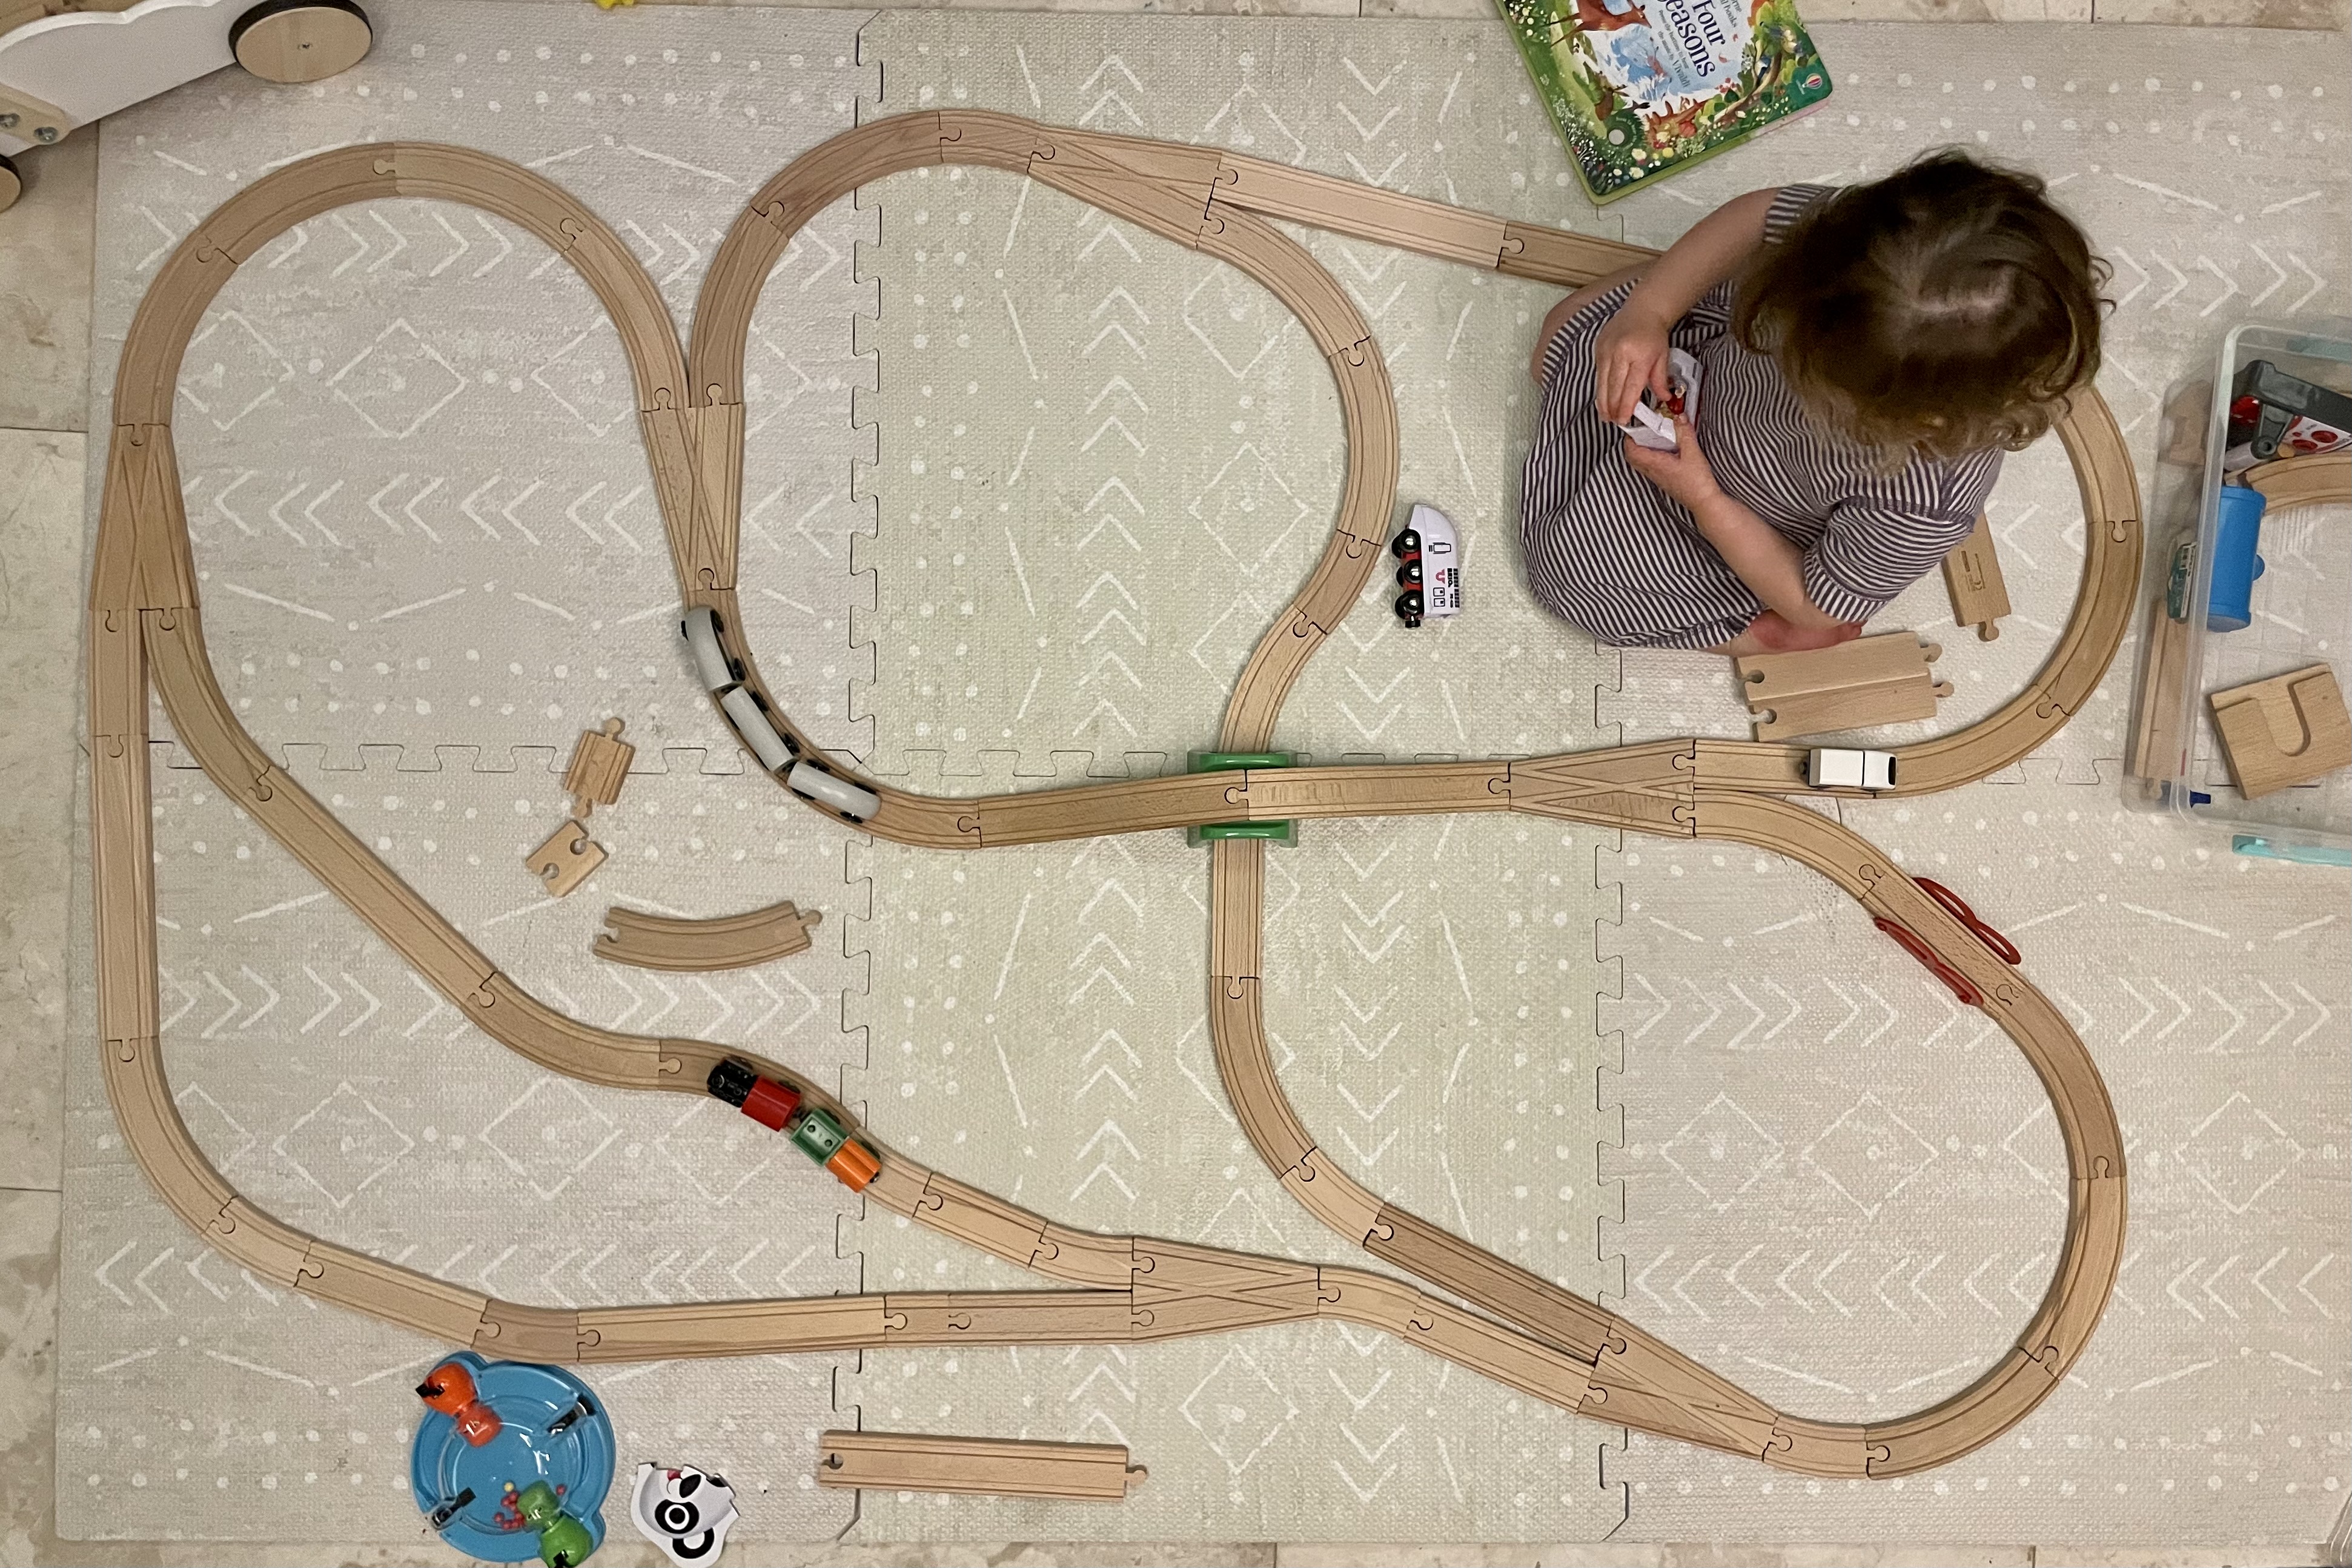 Bird’s-eye-view of a track layout including 6 forks and an overpass, with V sitting in the middle, looking down at a train in her hands.